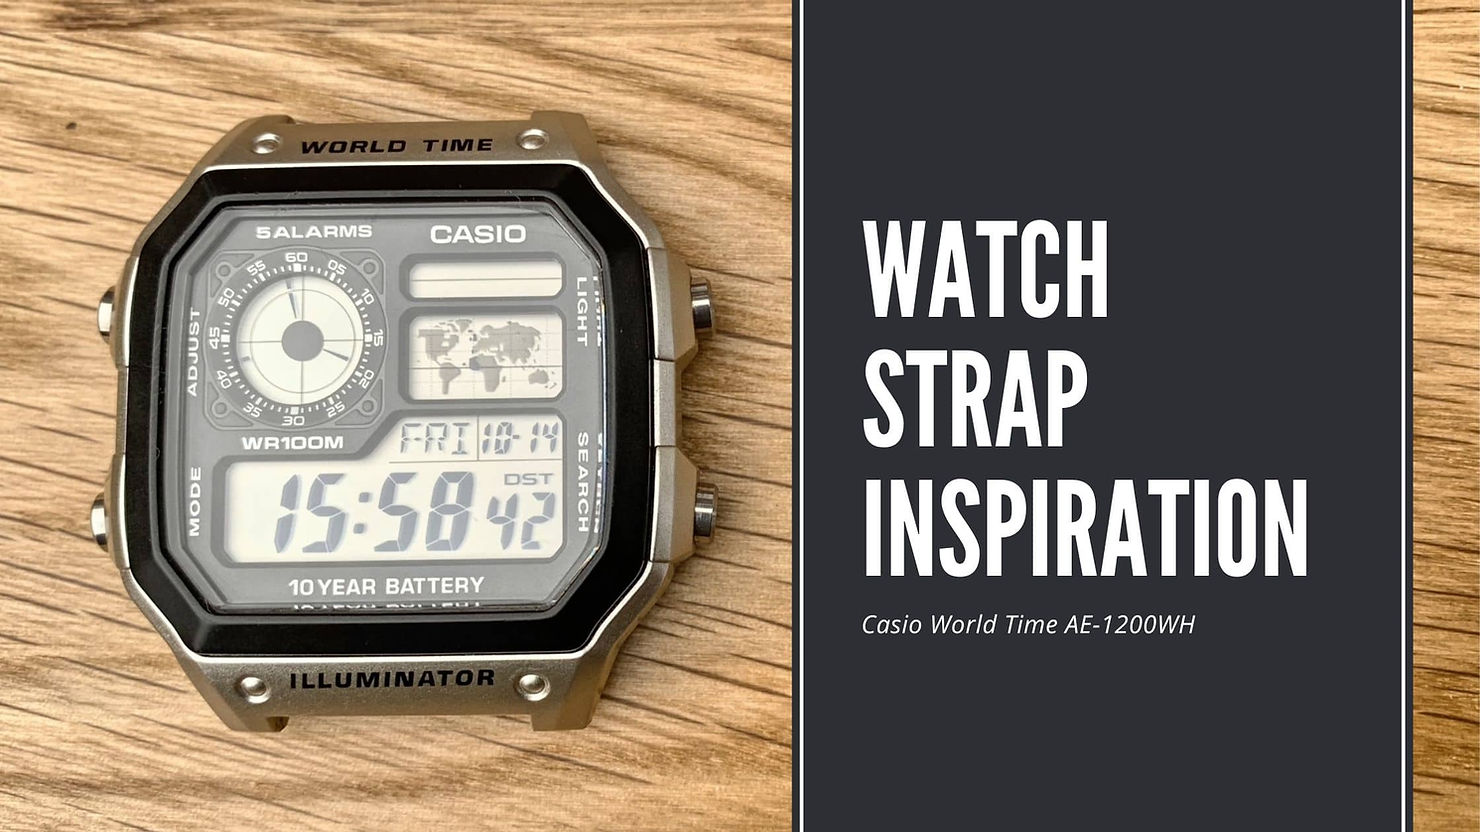 Casio World Time AE-1200WH Watch Strap Inspiration